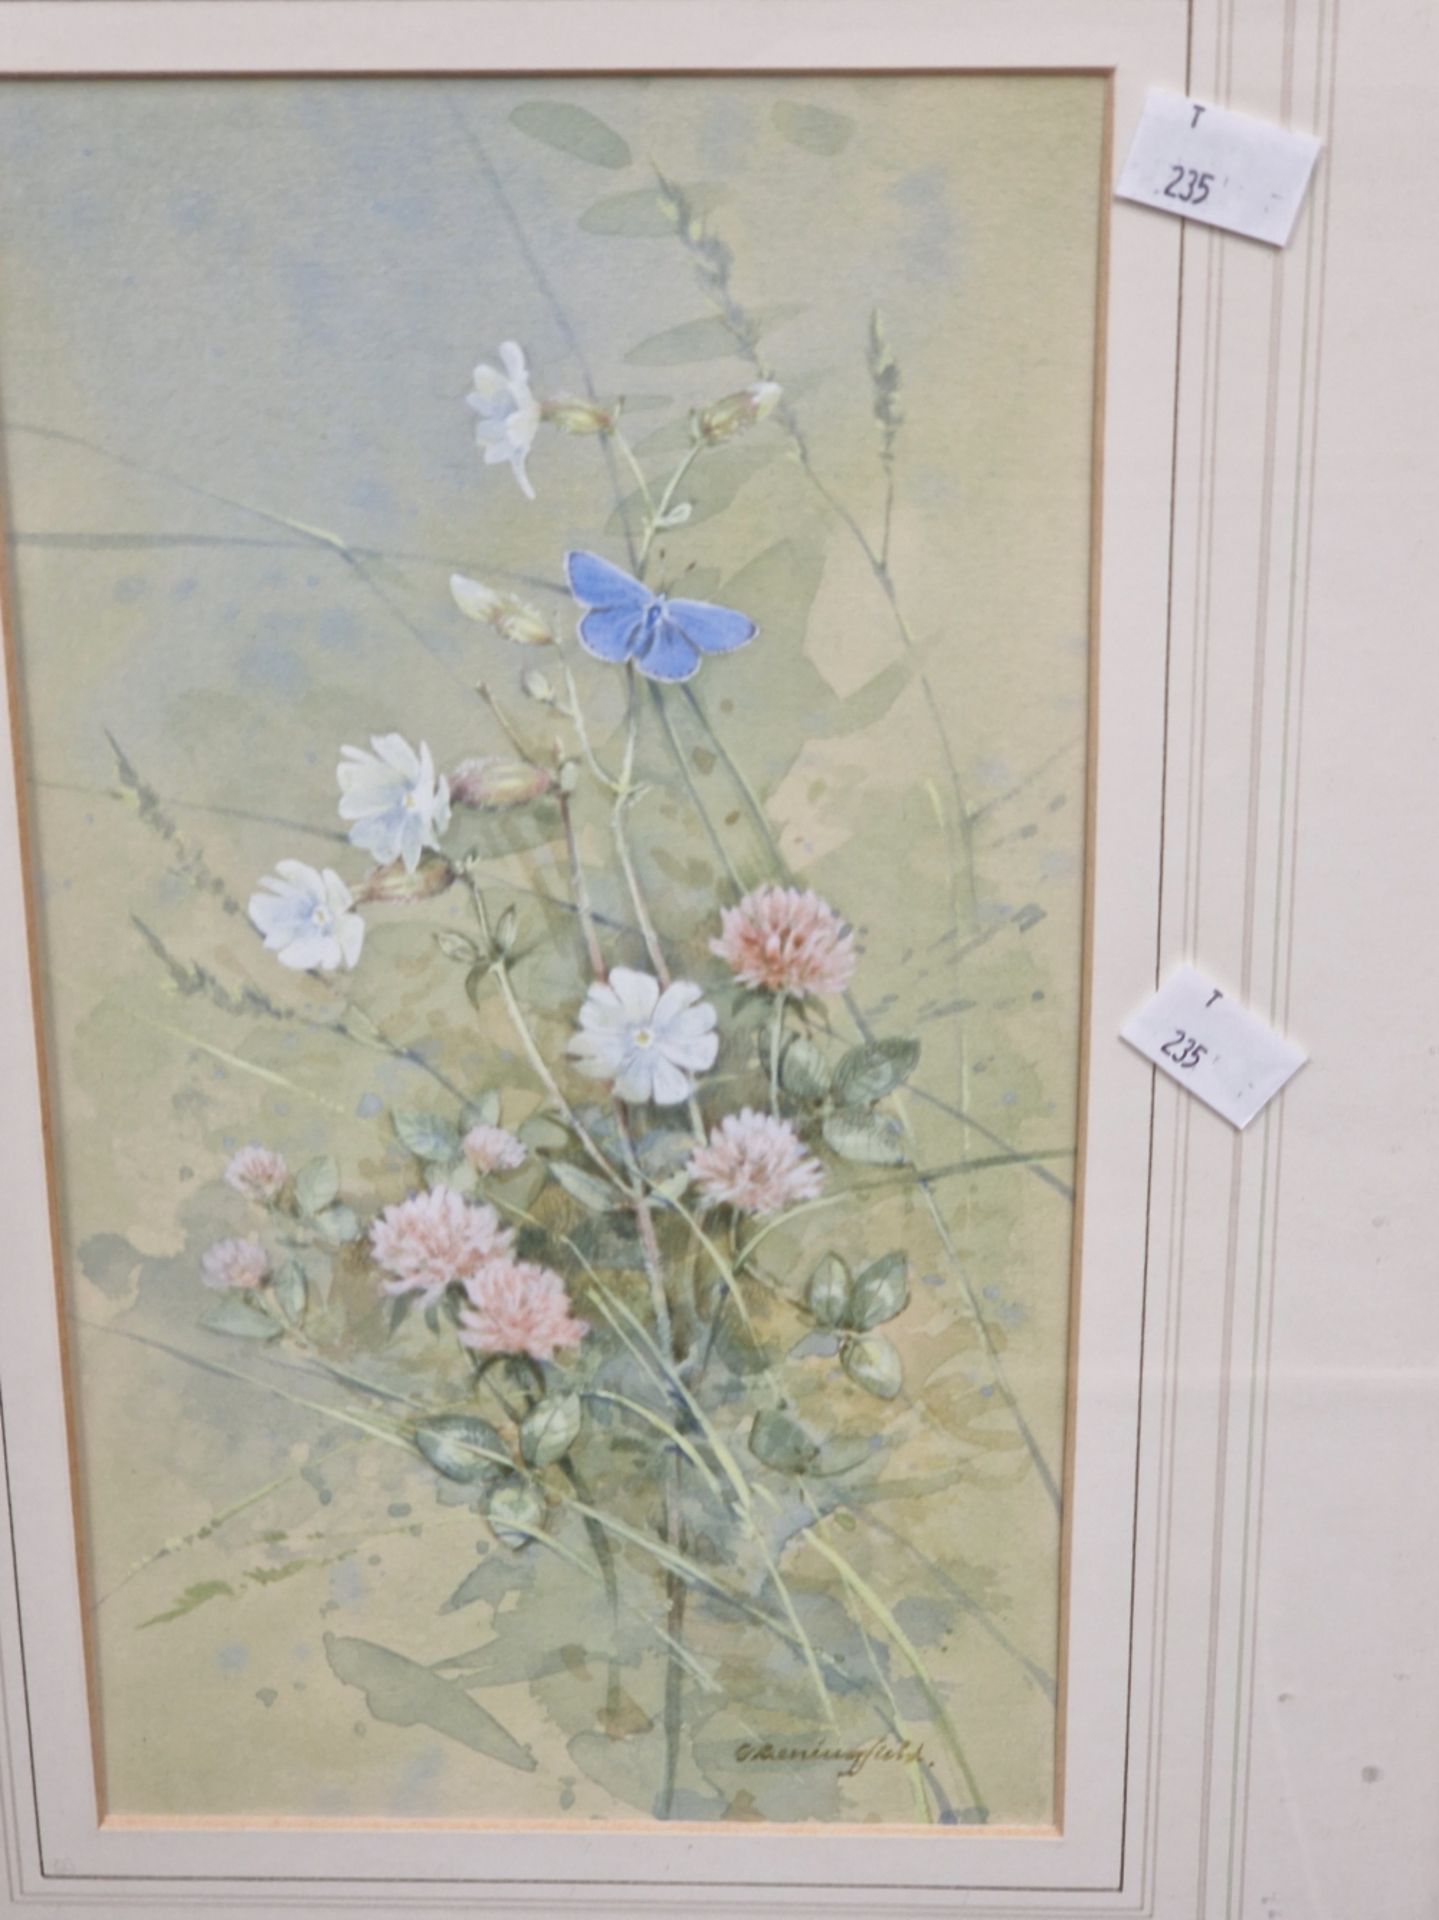 20th CENTURY ENGLISH SCHOOL A FLOWER STUDY WITH BUTTERFLY, SIGNED INDISTINCTLY, WATERCOLOUR. 30 x - Image 2 of 6